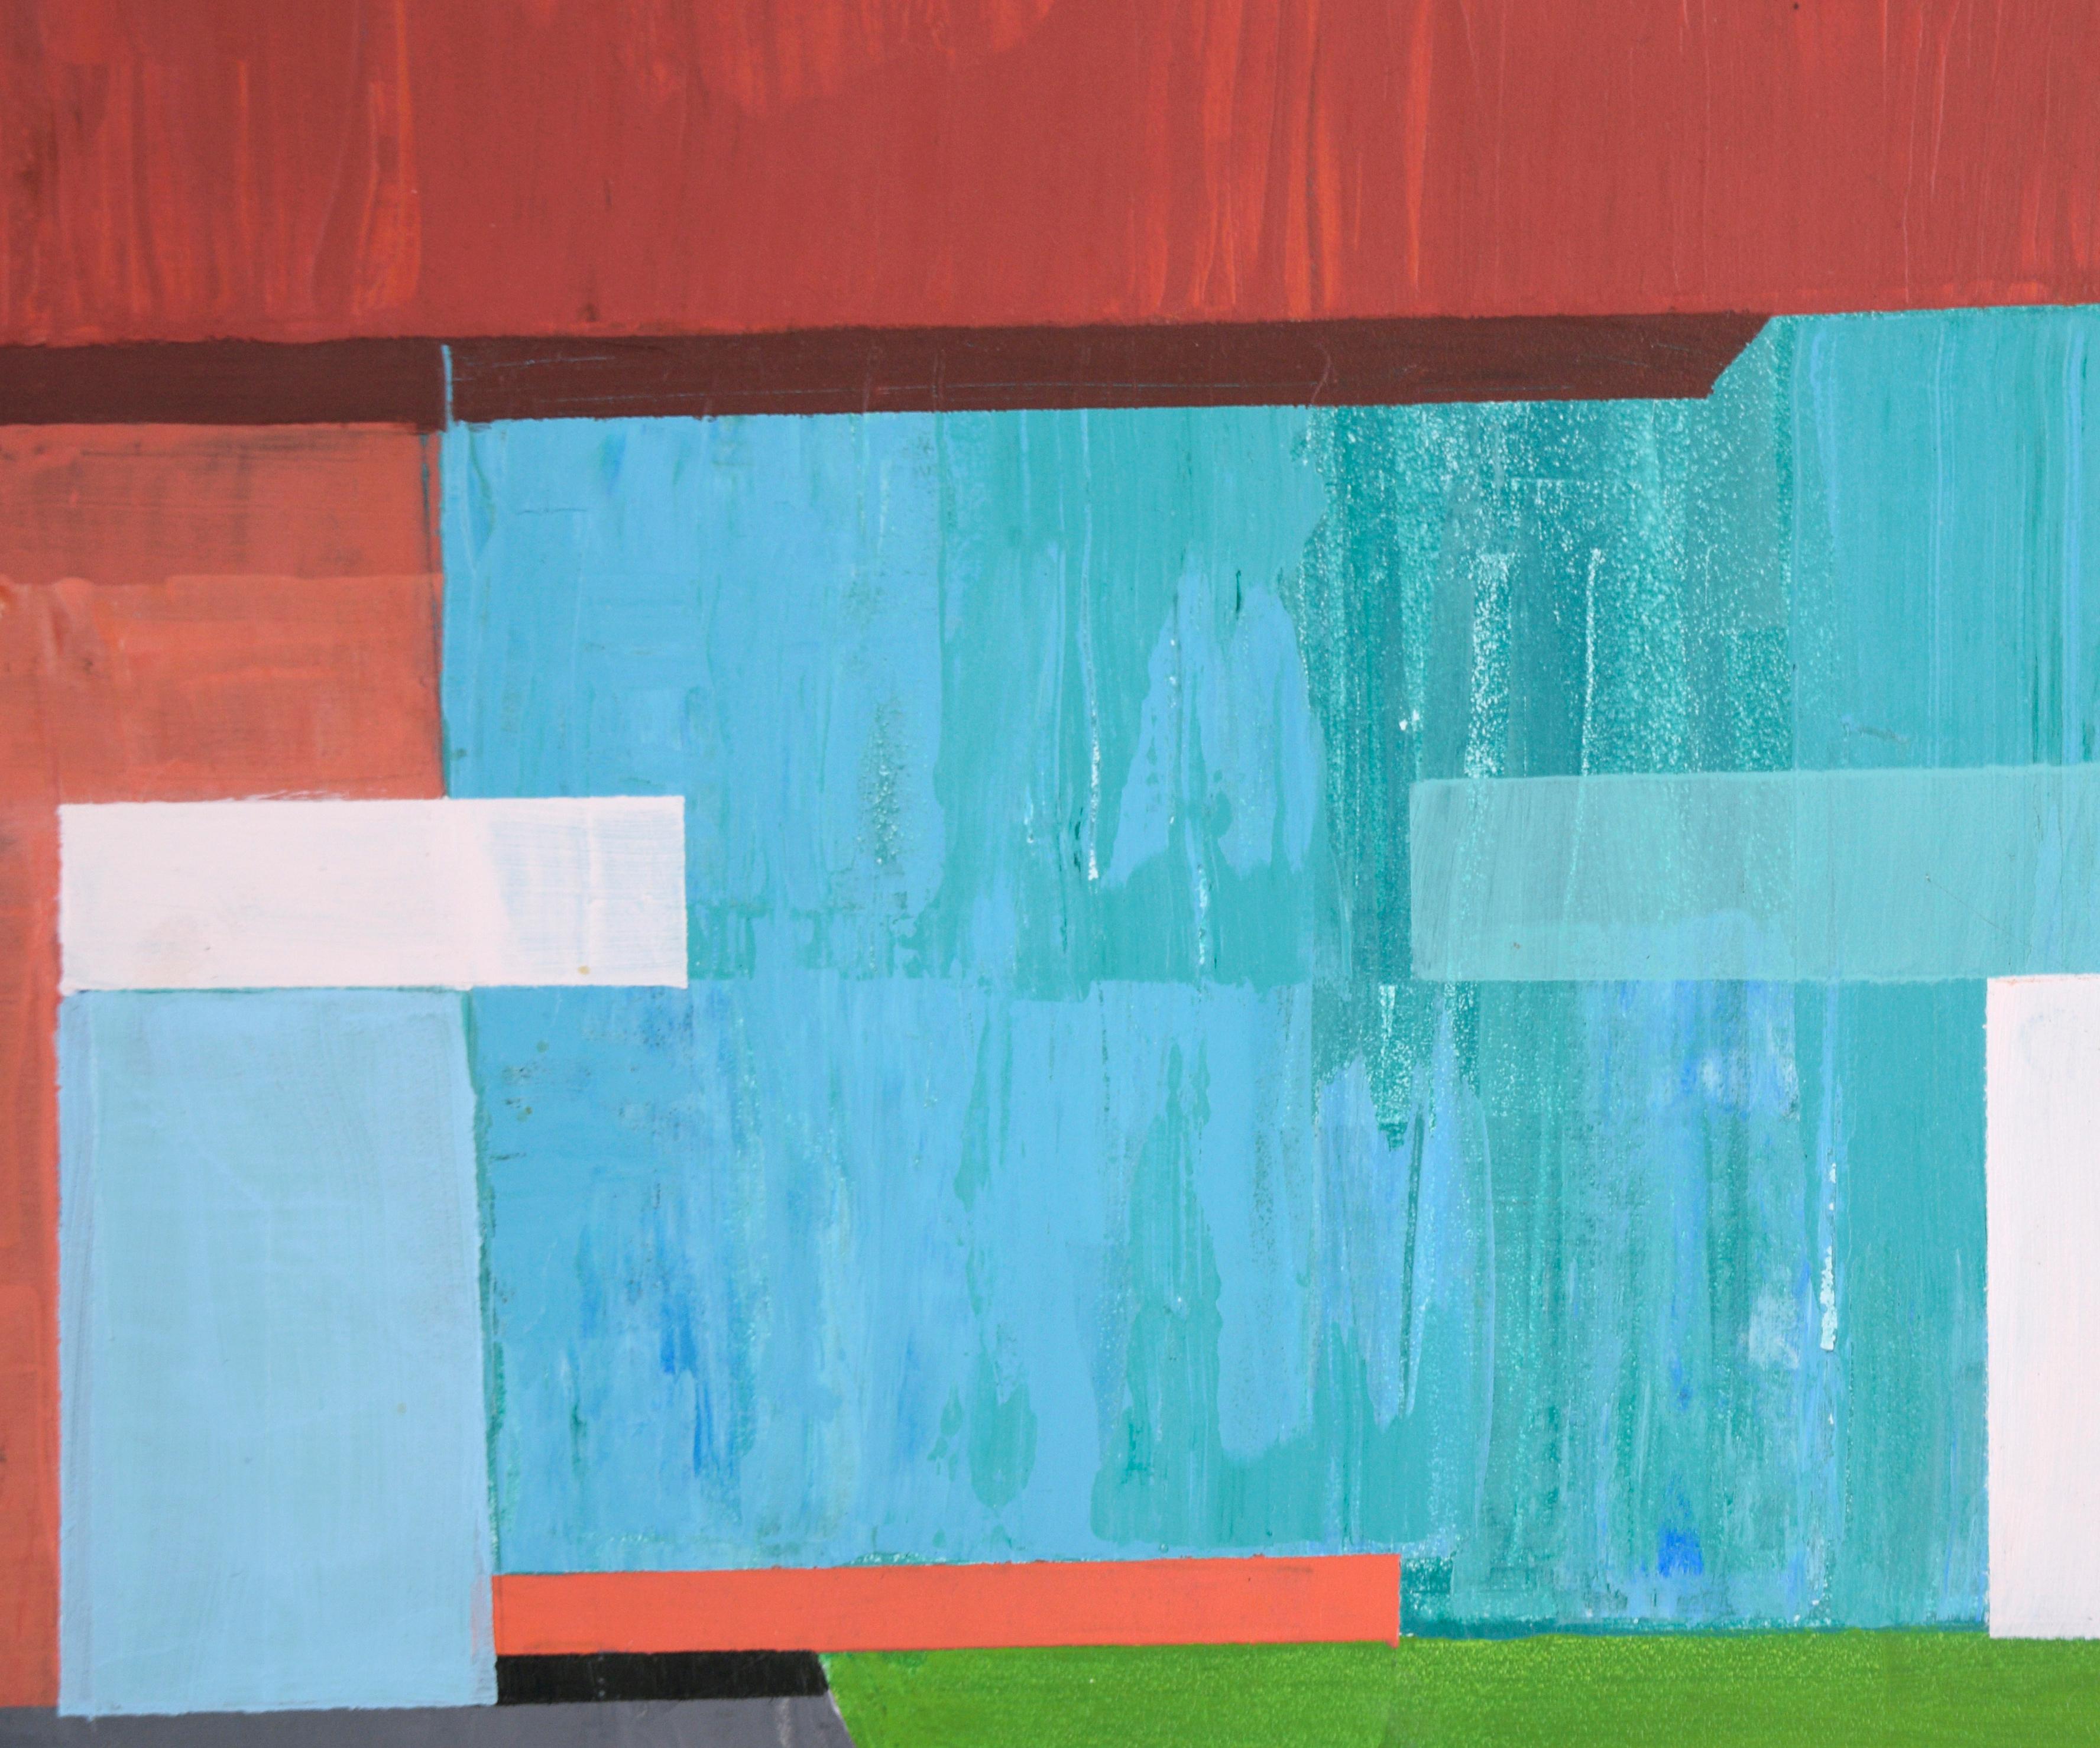 Vertical Abstract Geometric Composition - Painting by Unknown